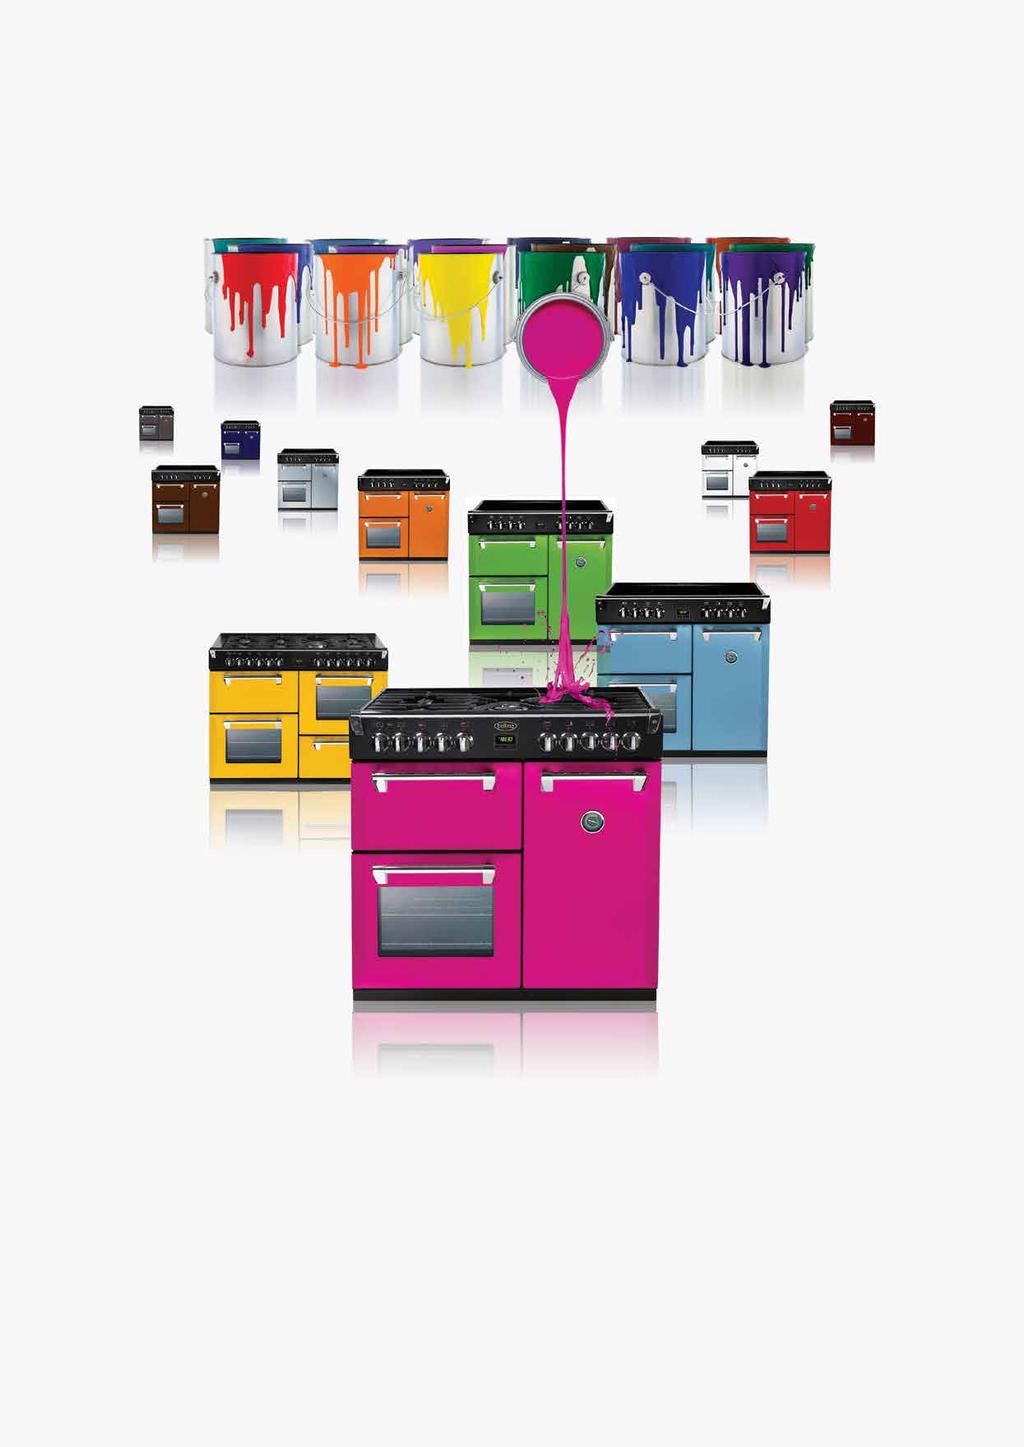 The Richmond Range Cooker series can be customised to your own colour selection.